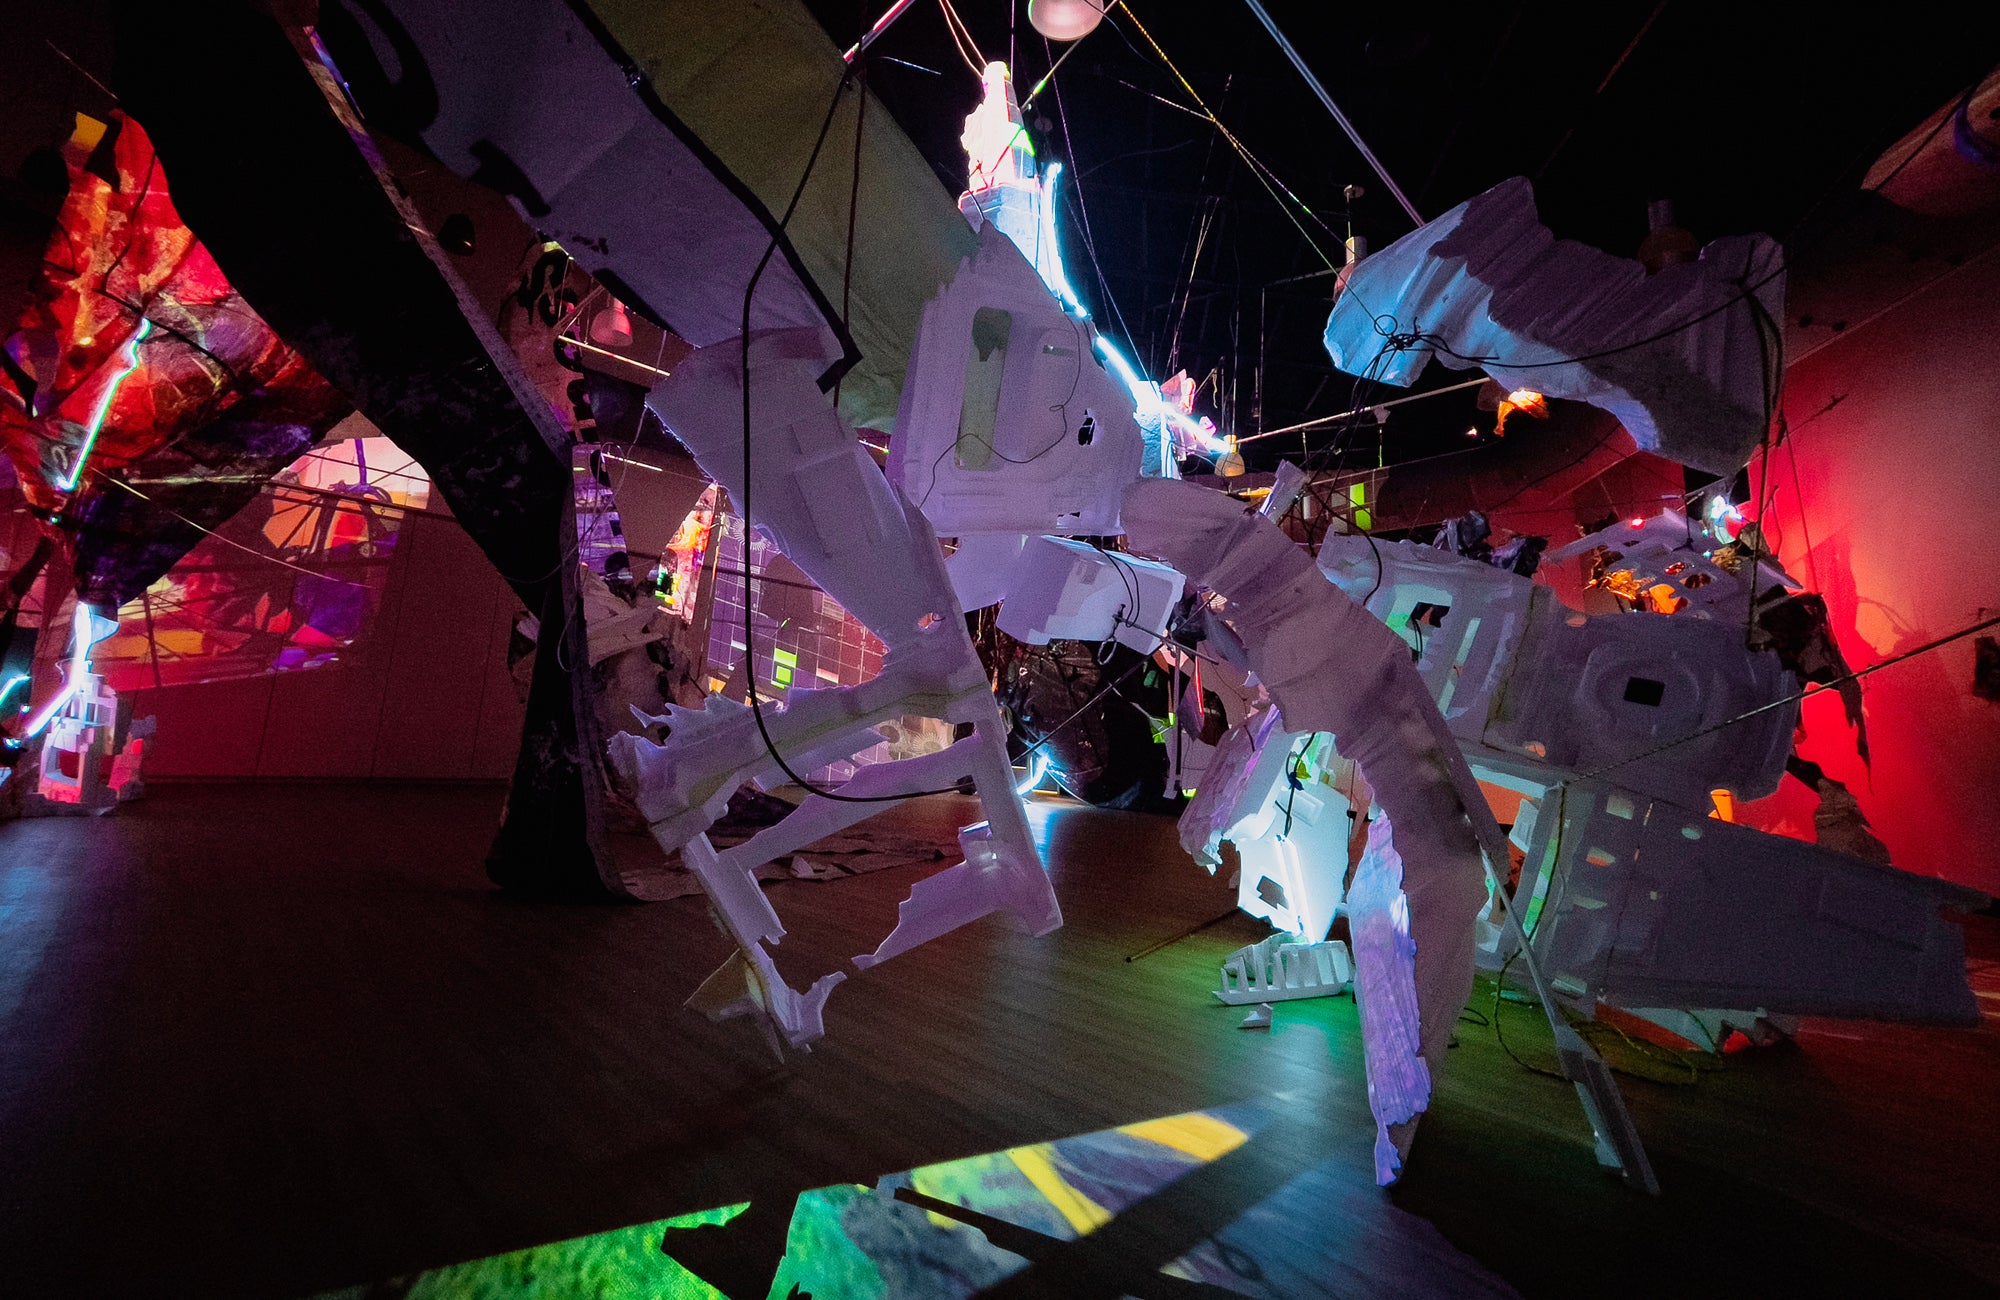 installation art made from discarded objects and video projection